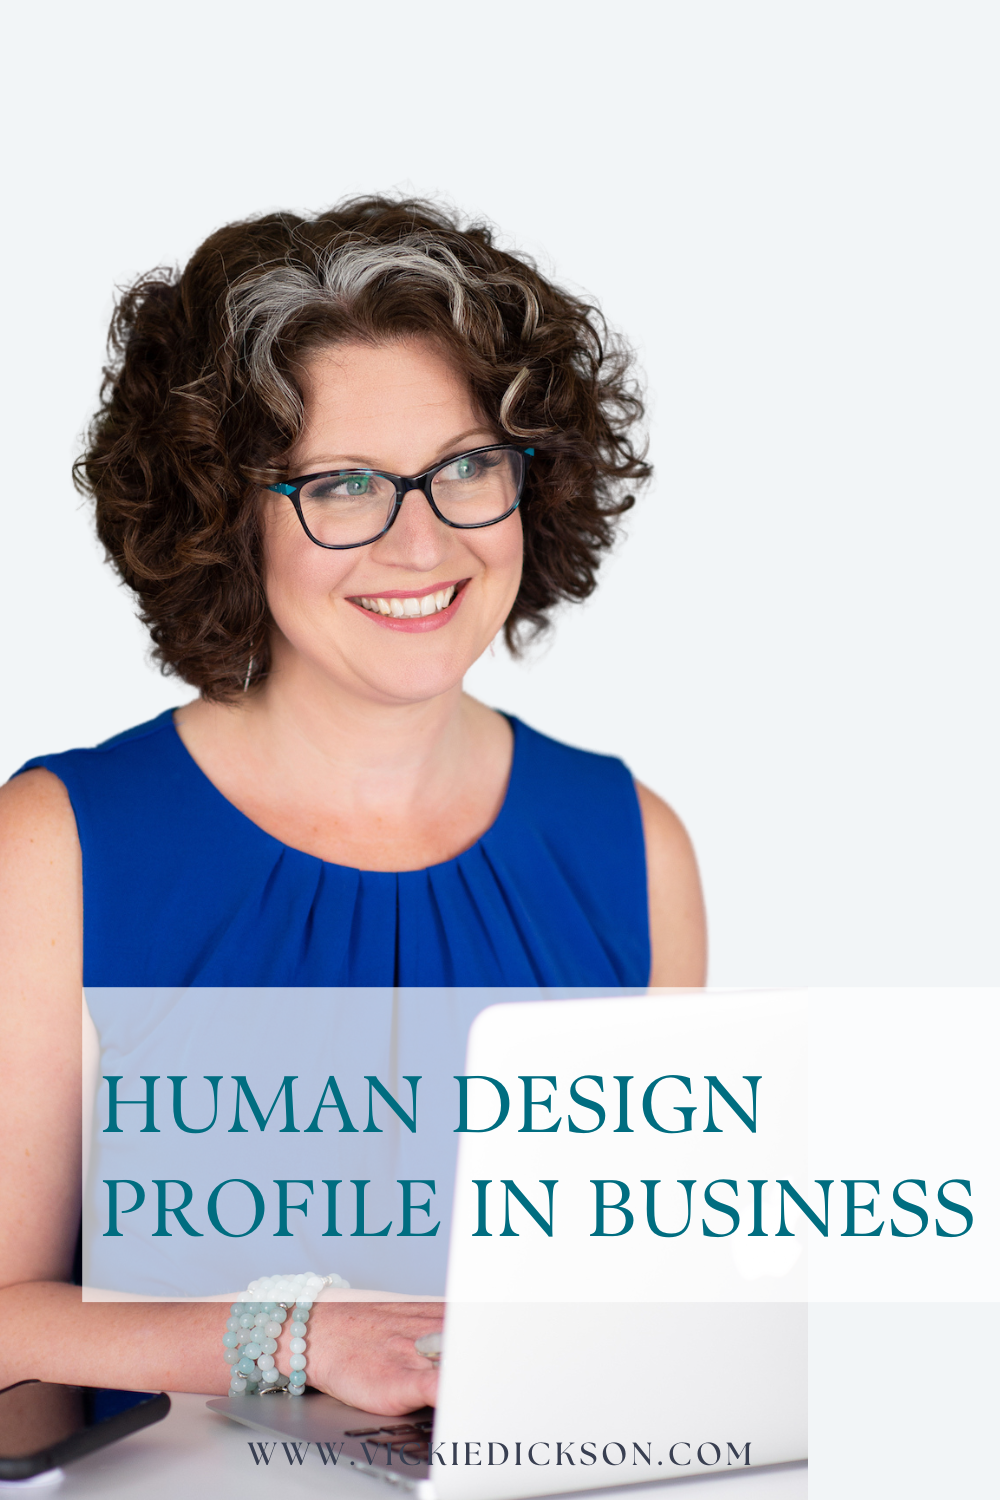 Human Design Profile for business